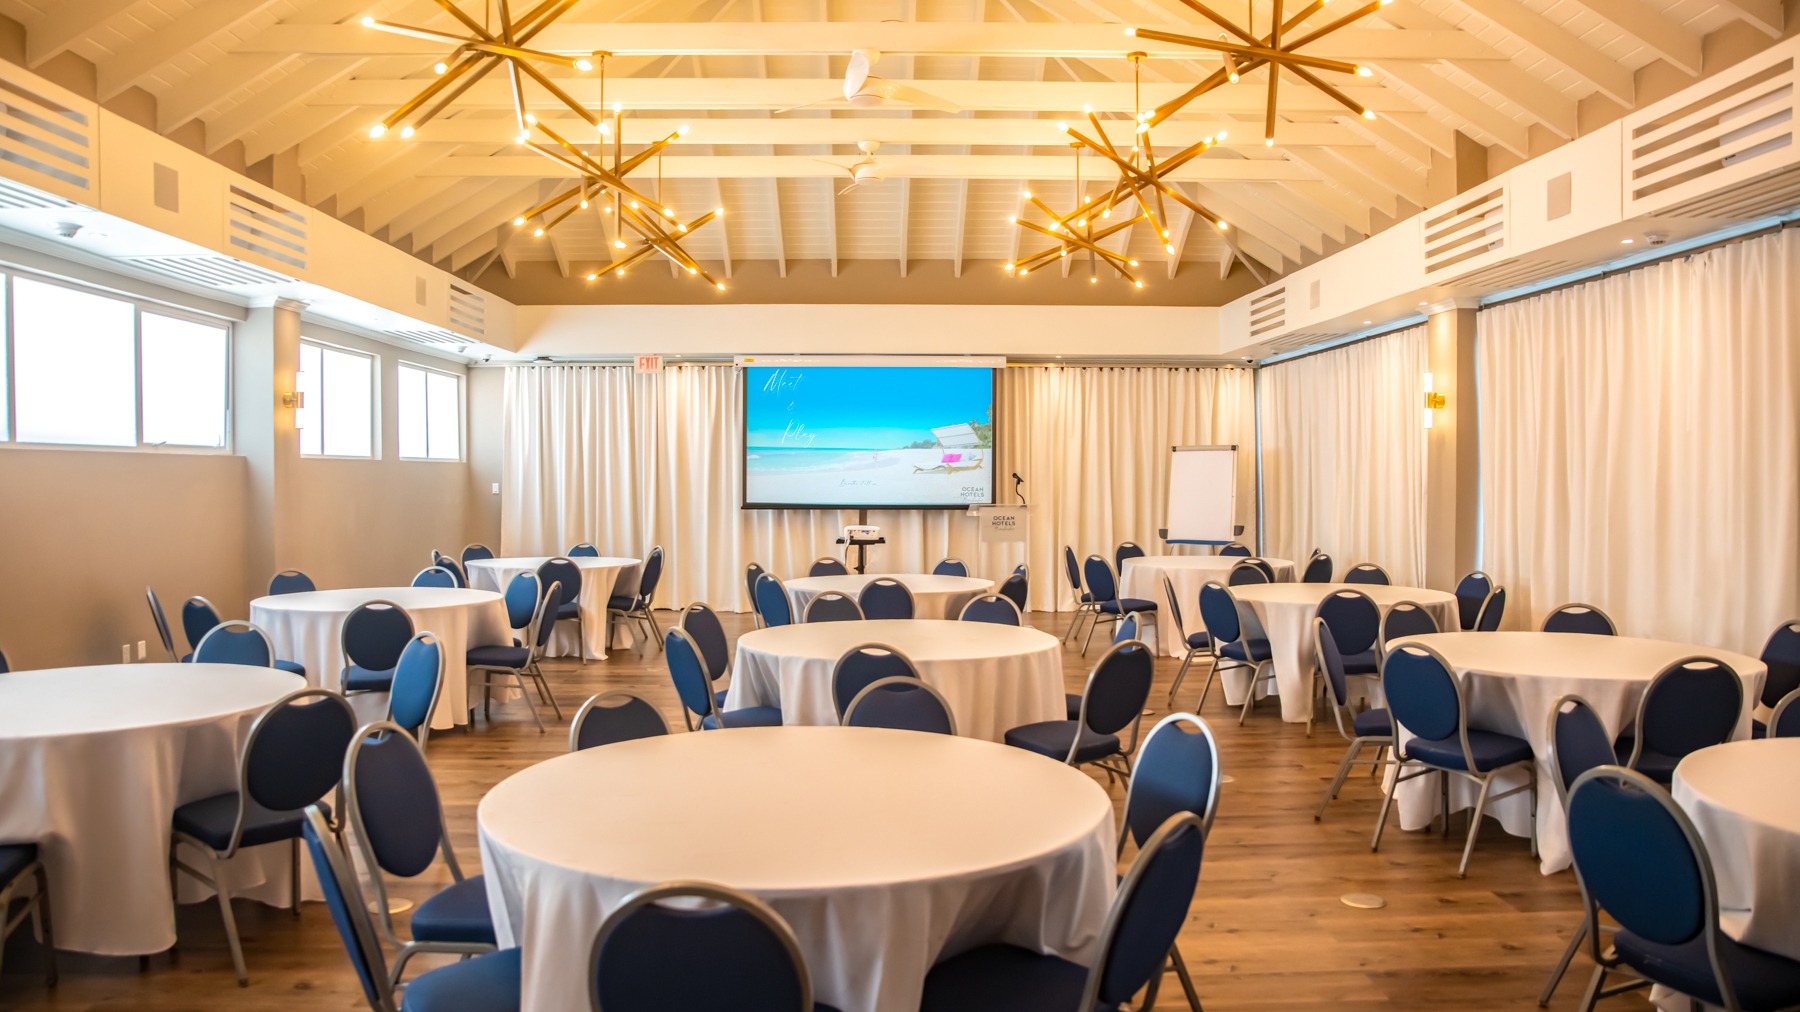 New and Renovated Hawksbill Conference Room at O2 Beach Club and Spa in Barbados